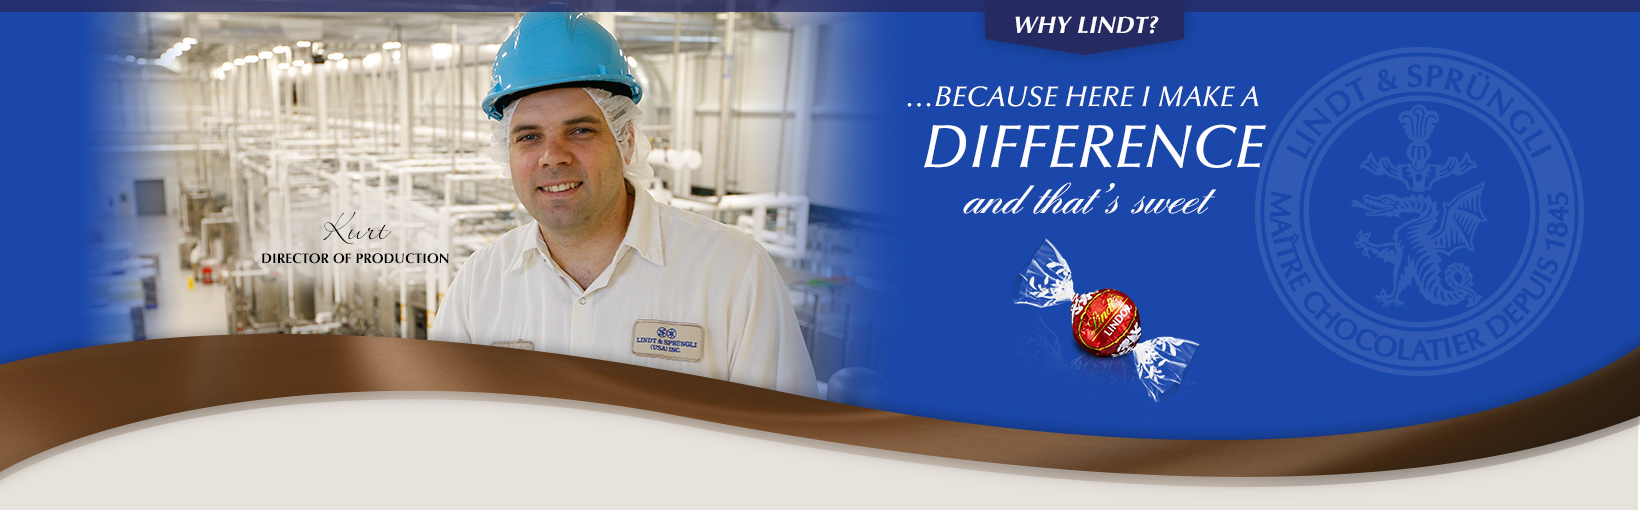 Why Lindt? …Because here I make a difference and that’s sweet.